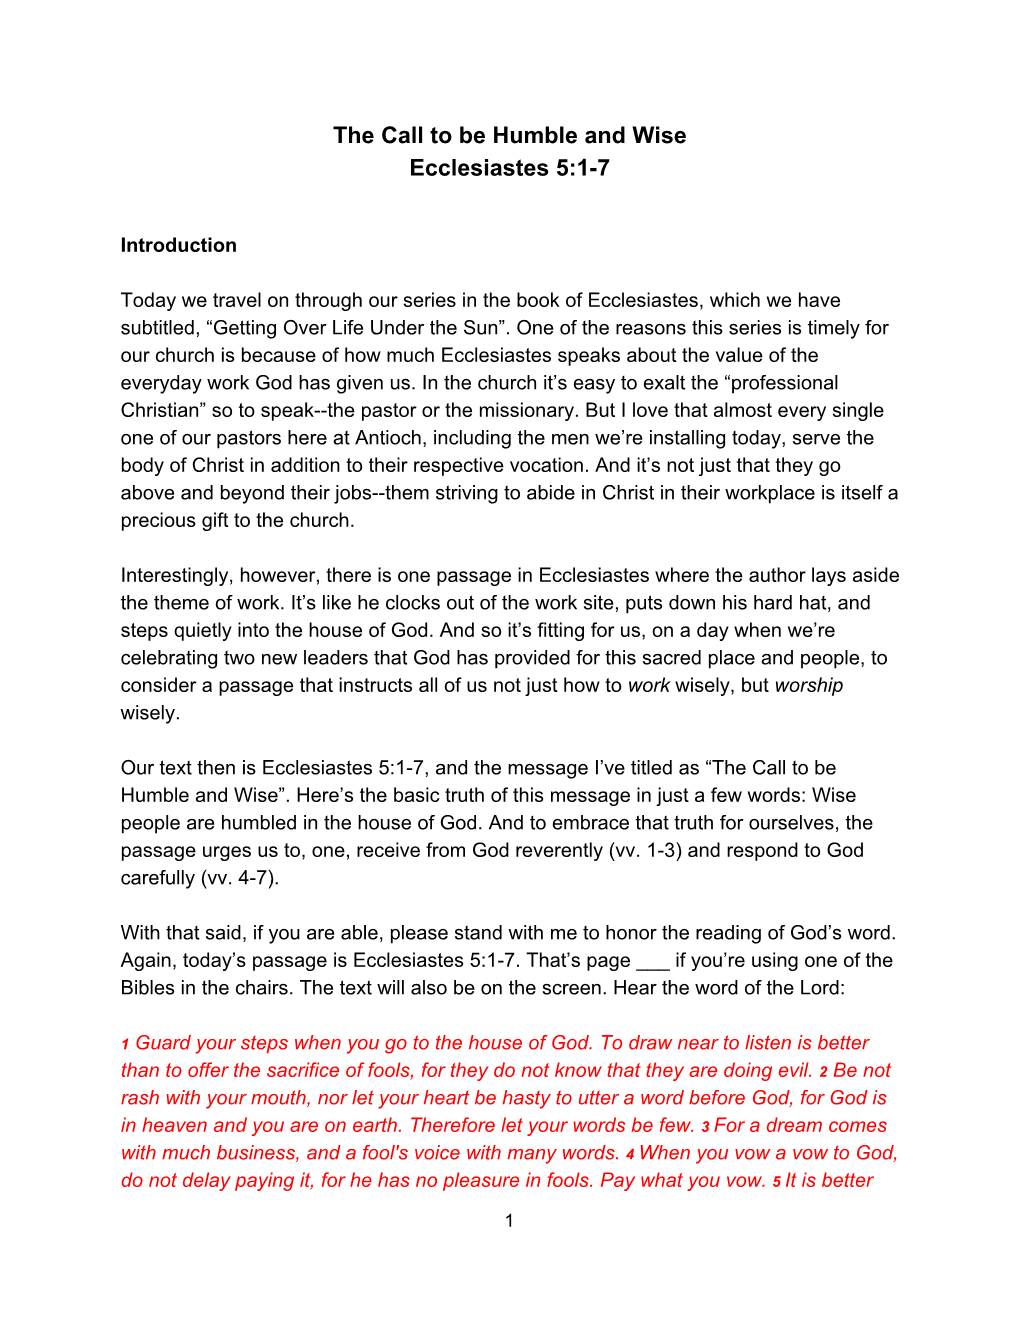 The Call to Be Humble and Wise Ecclesiastes 5:1-7